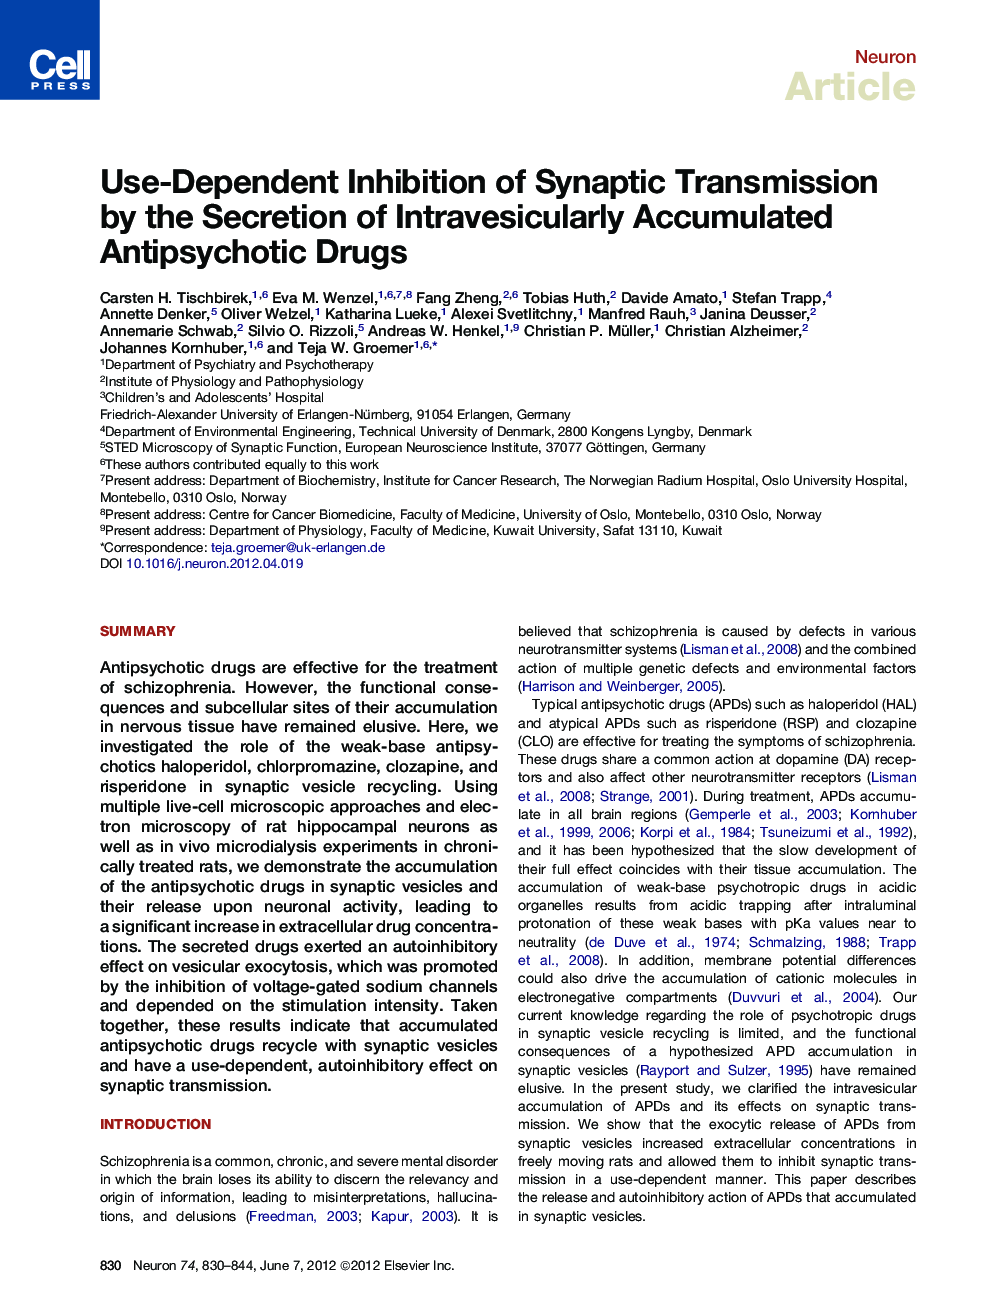 Use-Dependent Inhibition of Synaptic Transmission by the Secretion of Intravesicularly Accumulated Antipsychotic Drugs